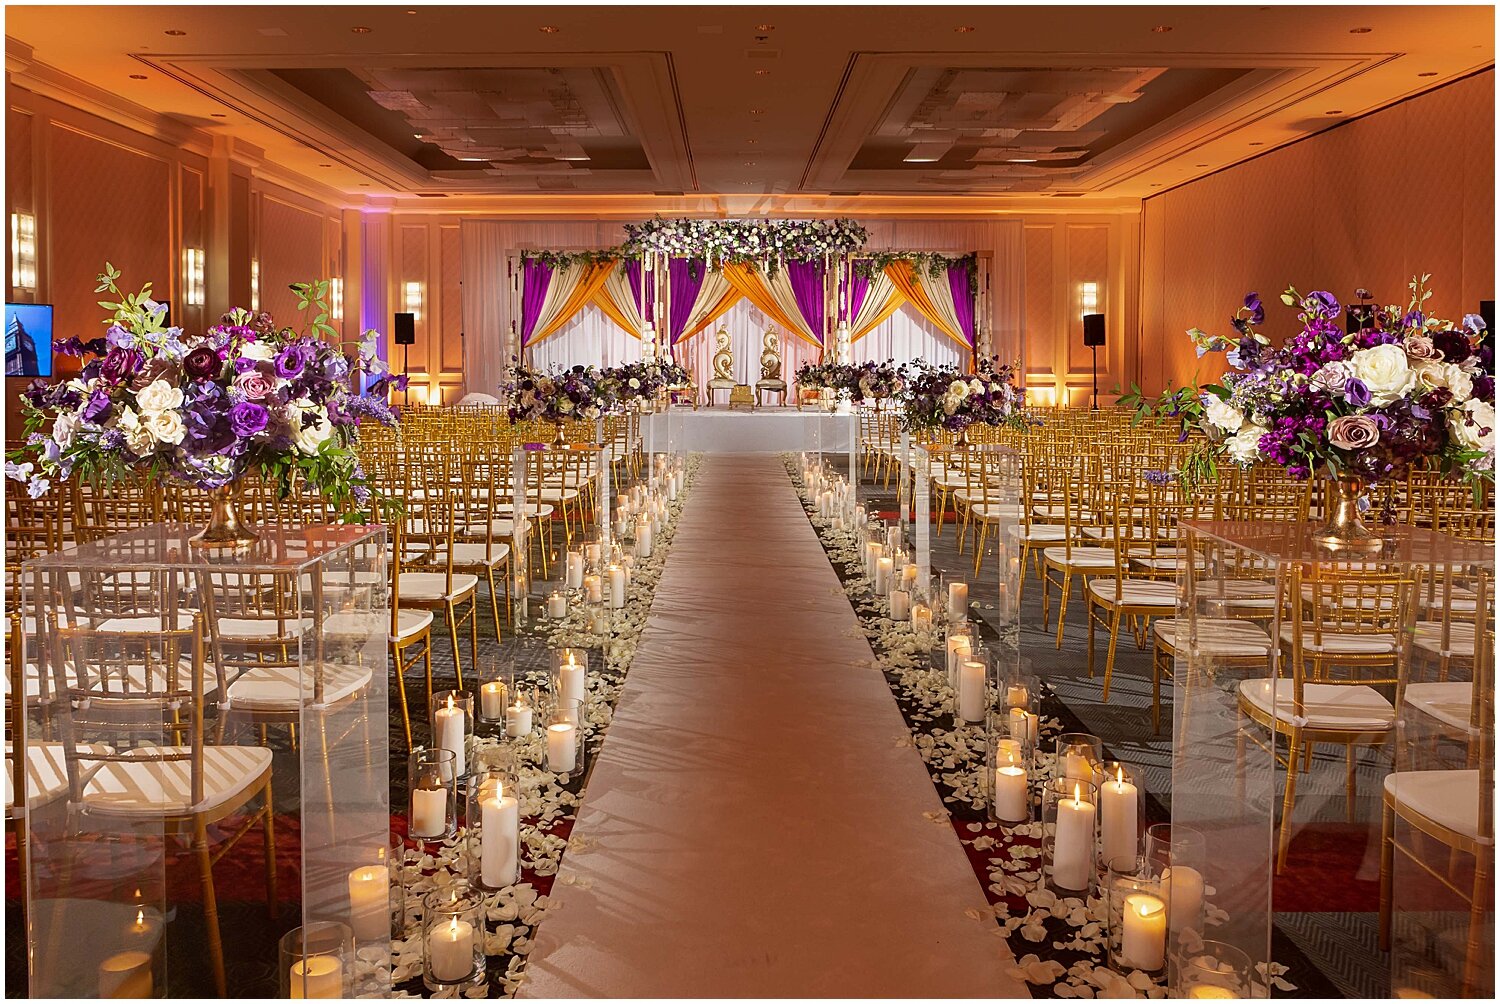  timeless wedding ceremony with candlelights in the aisle 